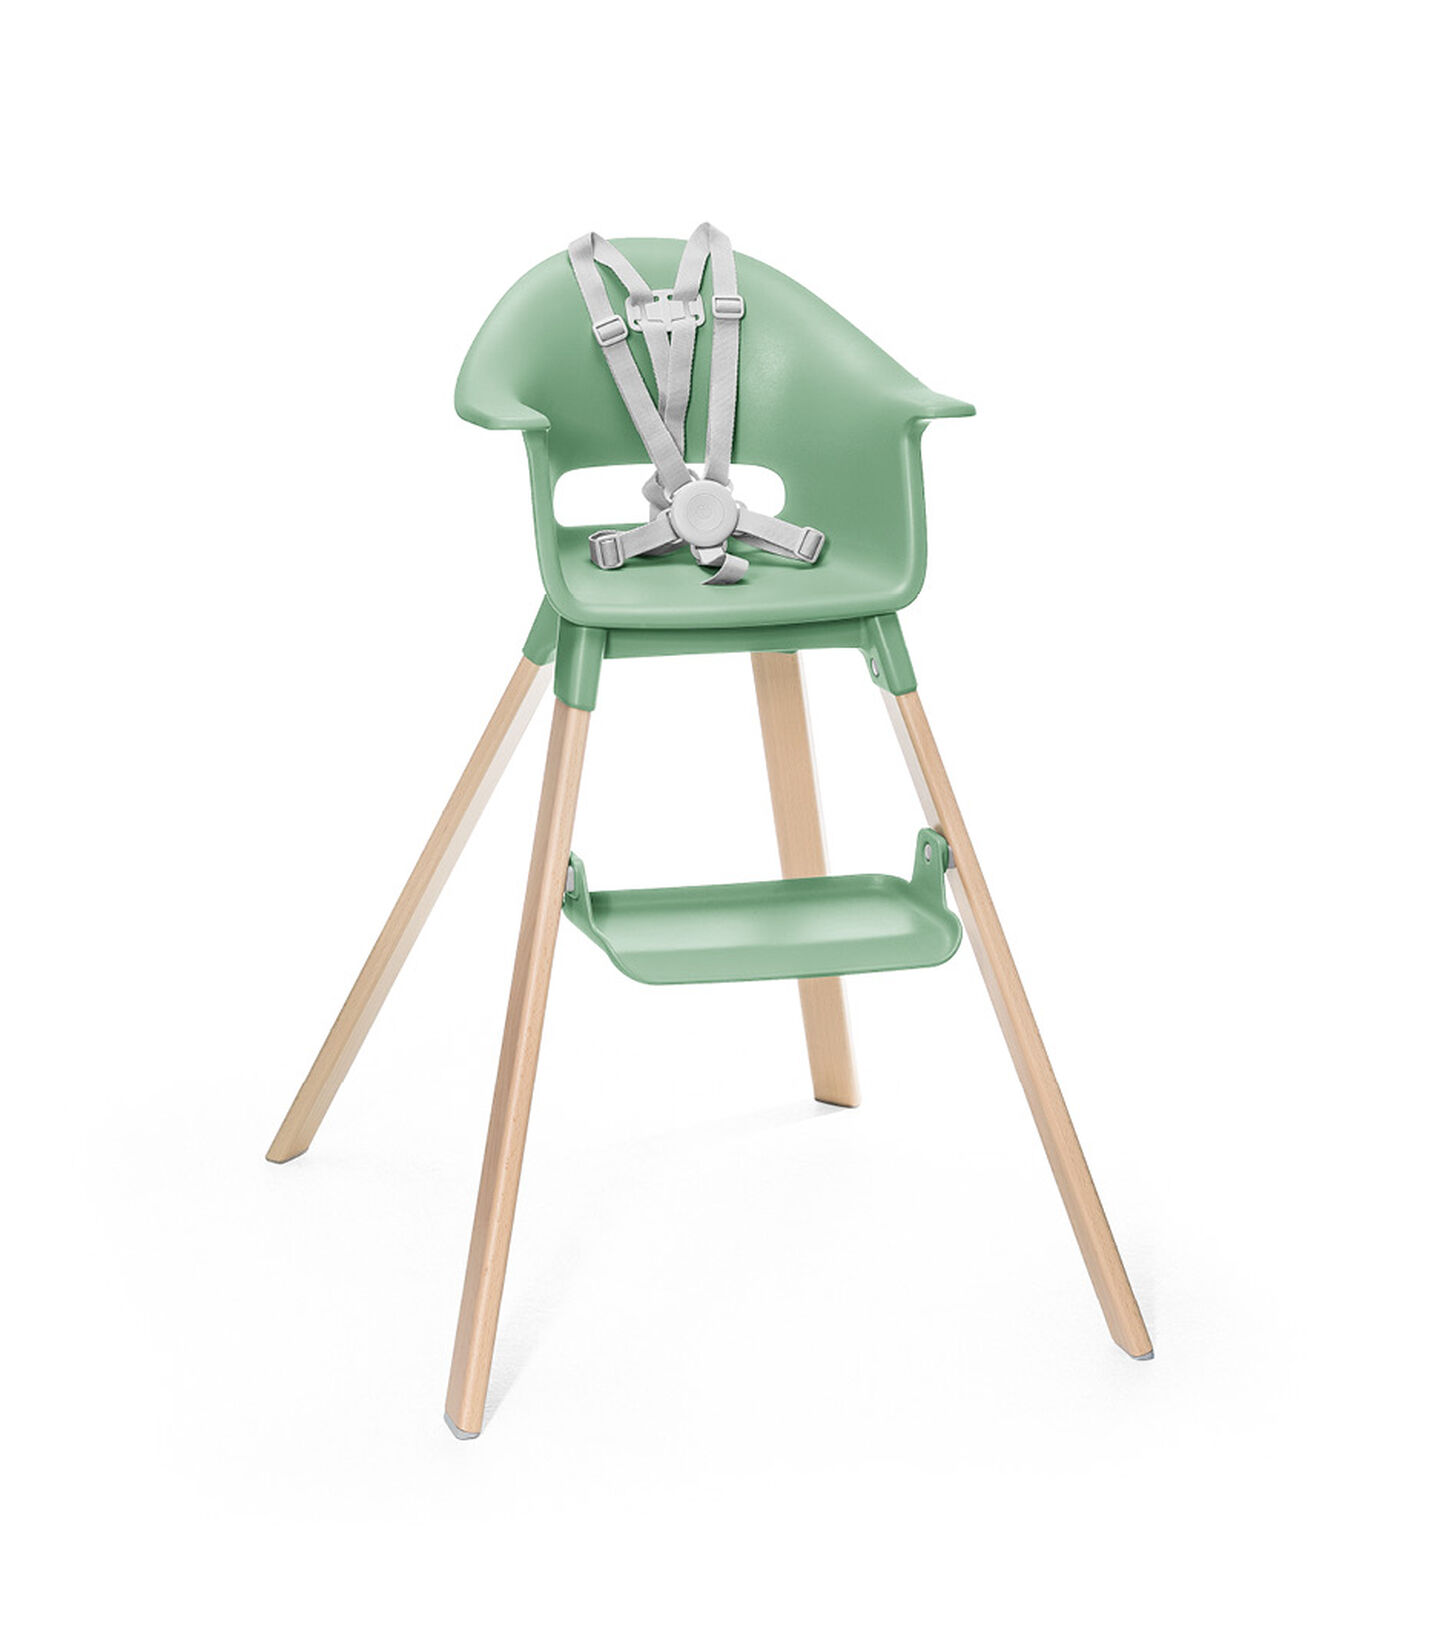 Stokke® Clikk™ High Chair. Natural Beech wood and Clover Green plastic parts. Stokke® Harness attached. Footrest high. view 2